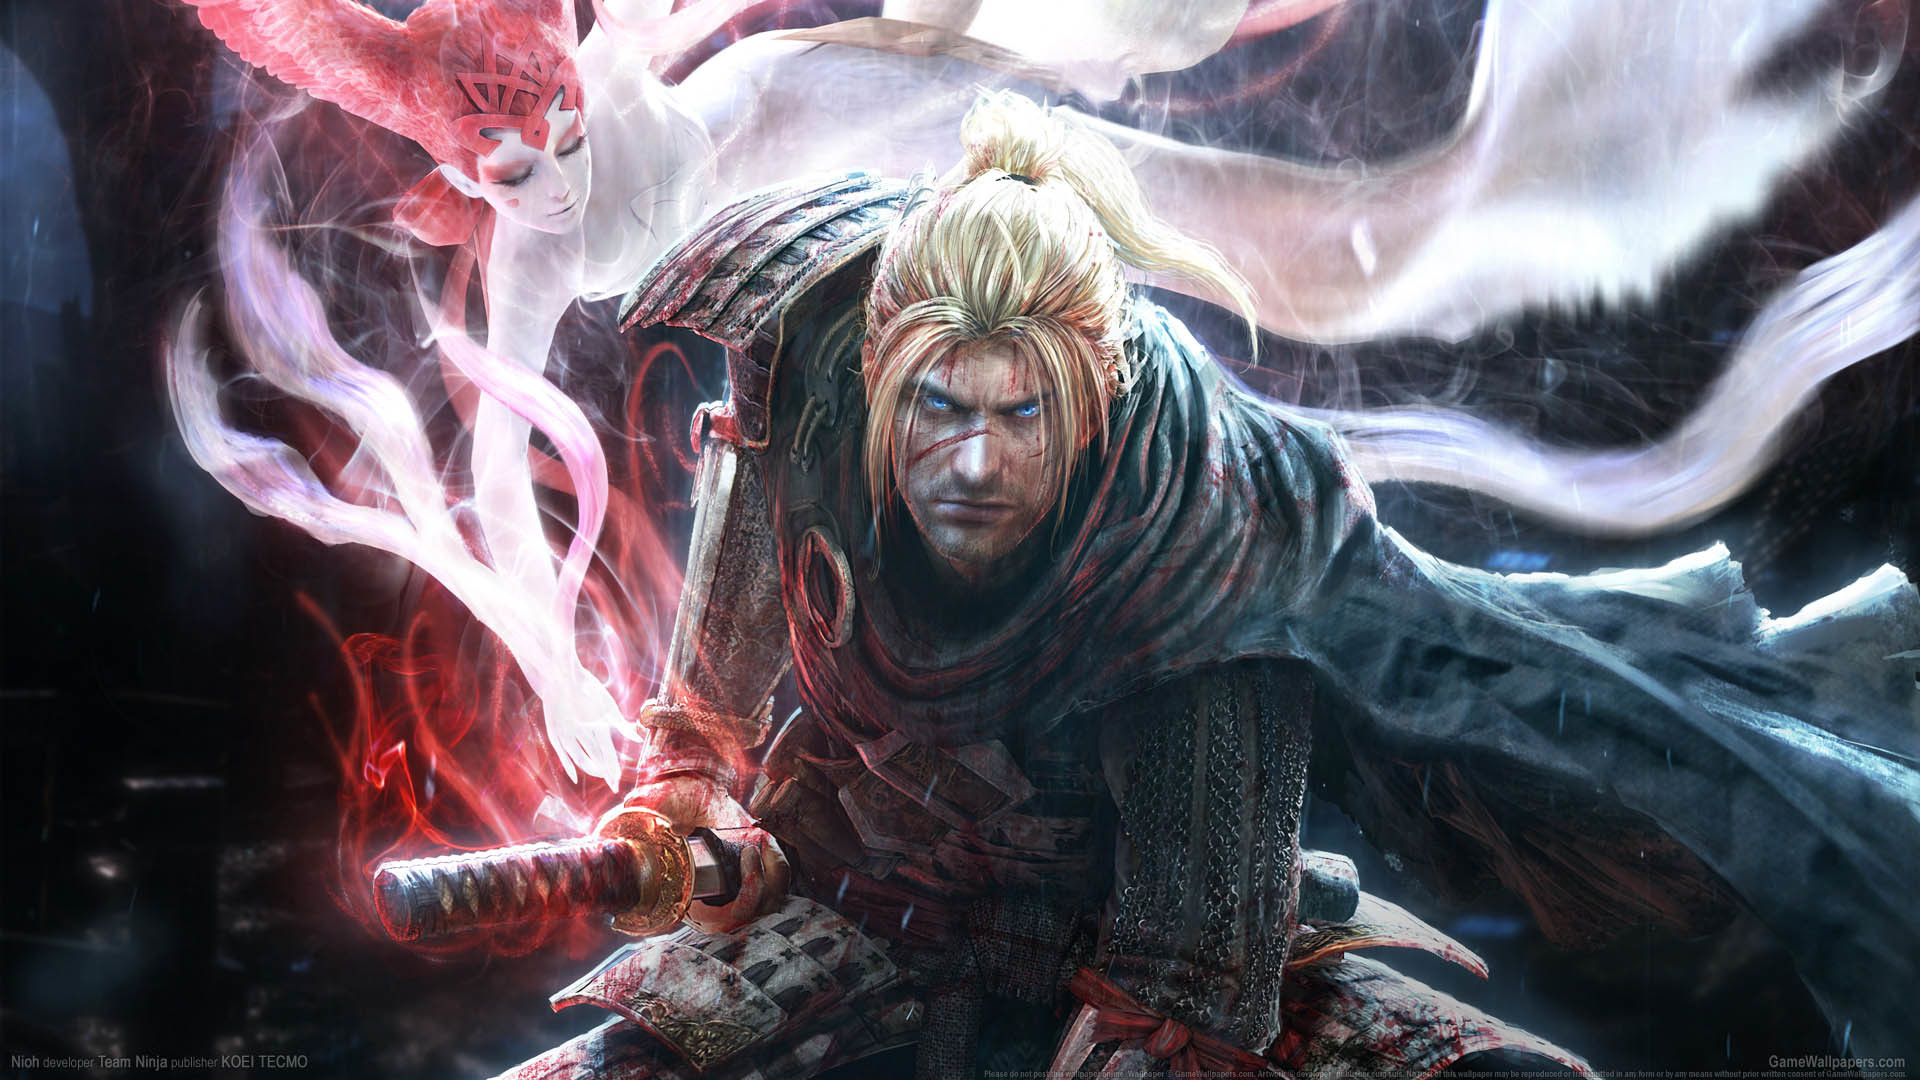 Nioh Wallpaper Or Background Nioh Wallpaper Or Background 01 1920x1080